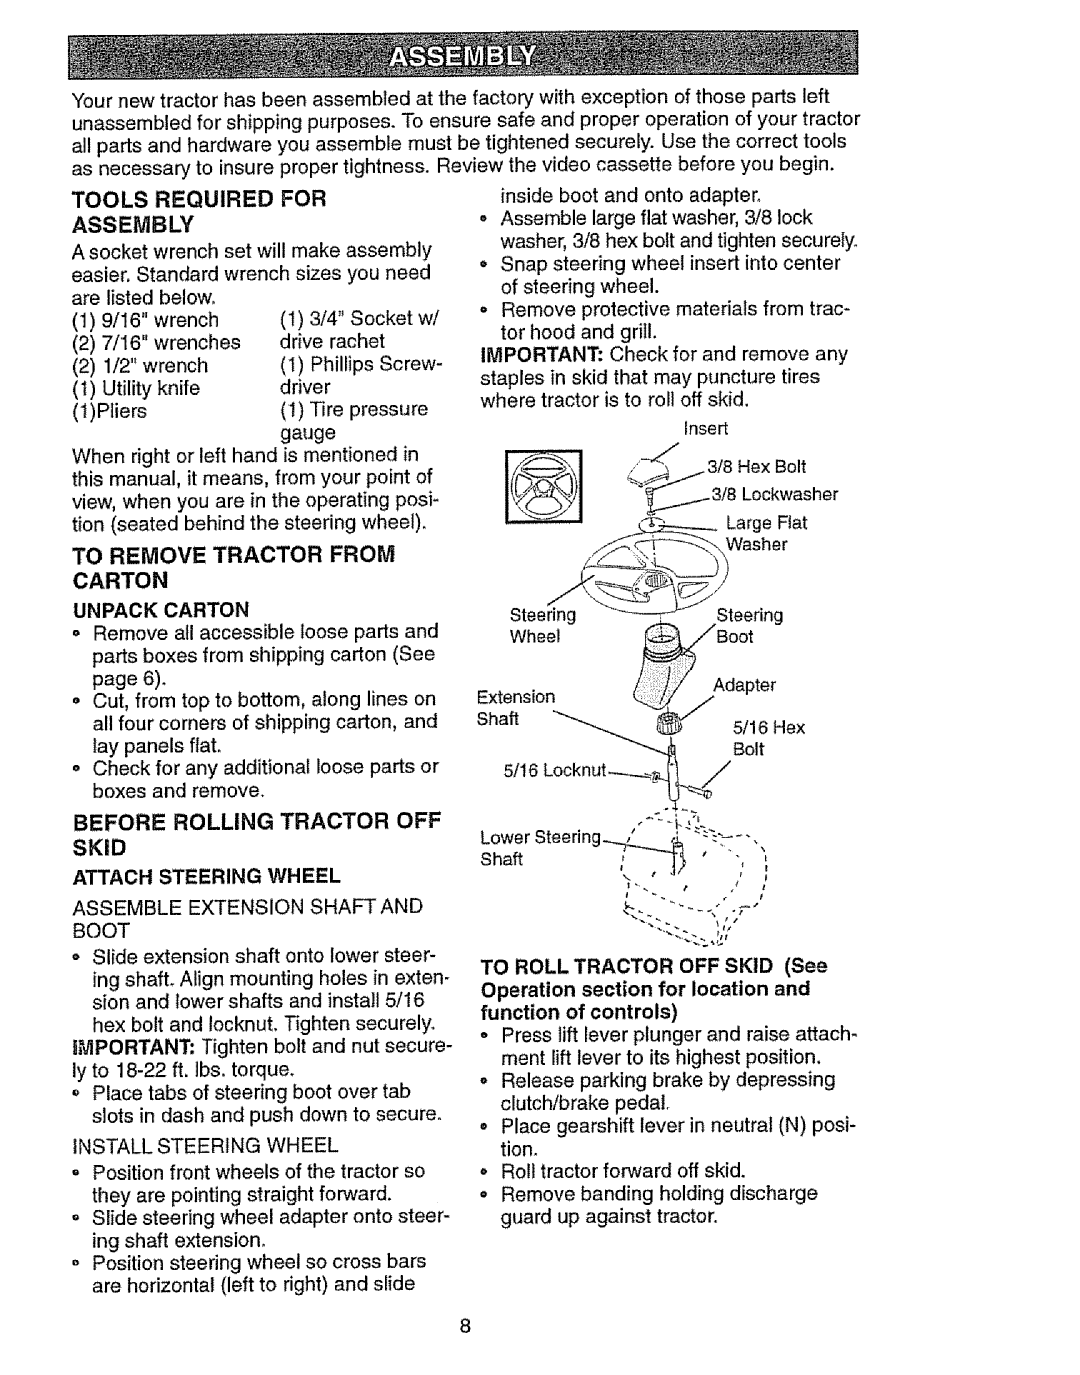 Craftsman 917.27103 owner manual Tools Required For Assembly, Before Rolling Tractor Off Skid, Attach Steering Wheel 